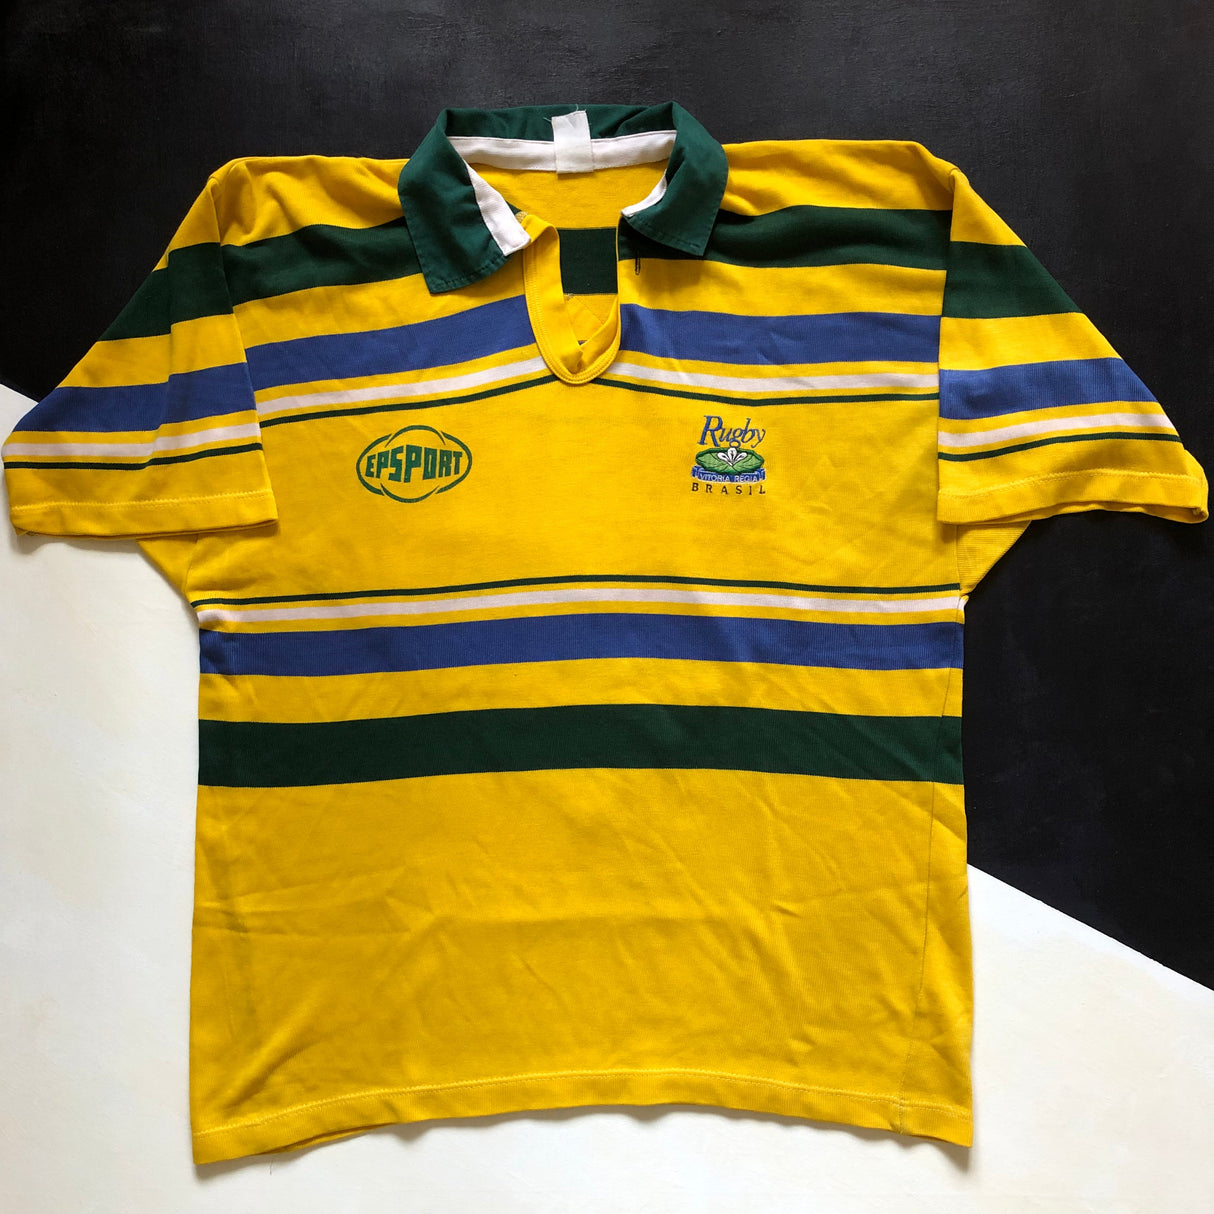 Brazil National Rugby Team Jersey 1998/99 Match Worn XL Underdog Rugby - The Tier 2 Rugby Shop 